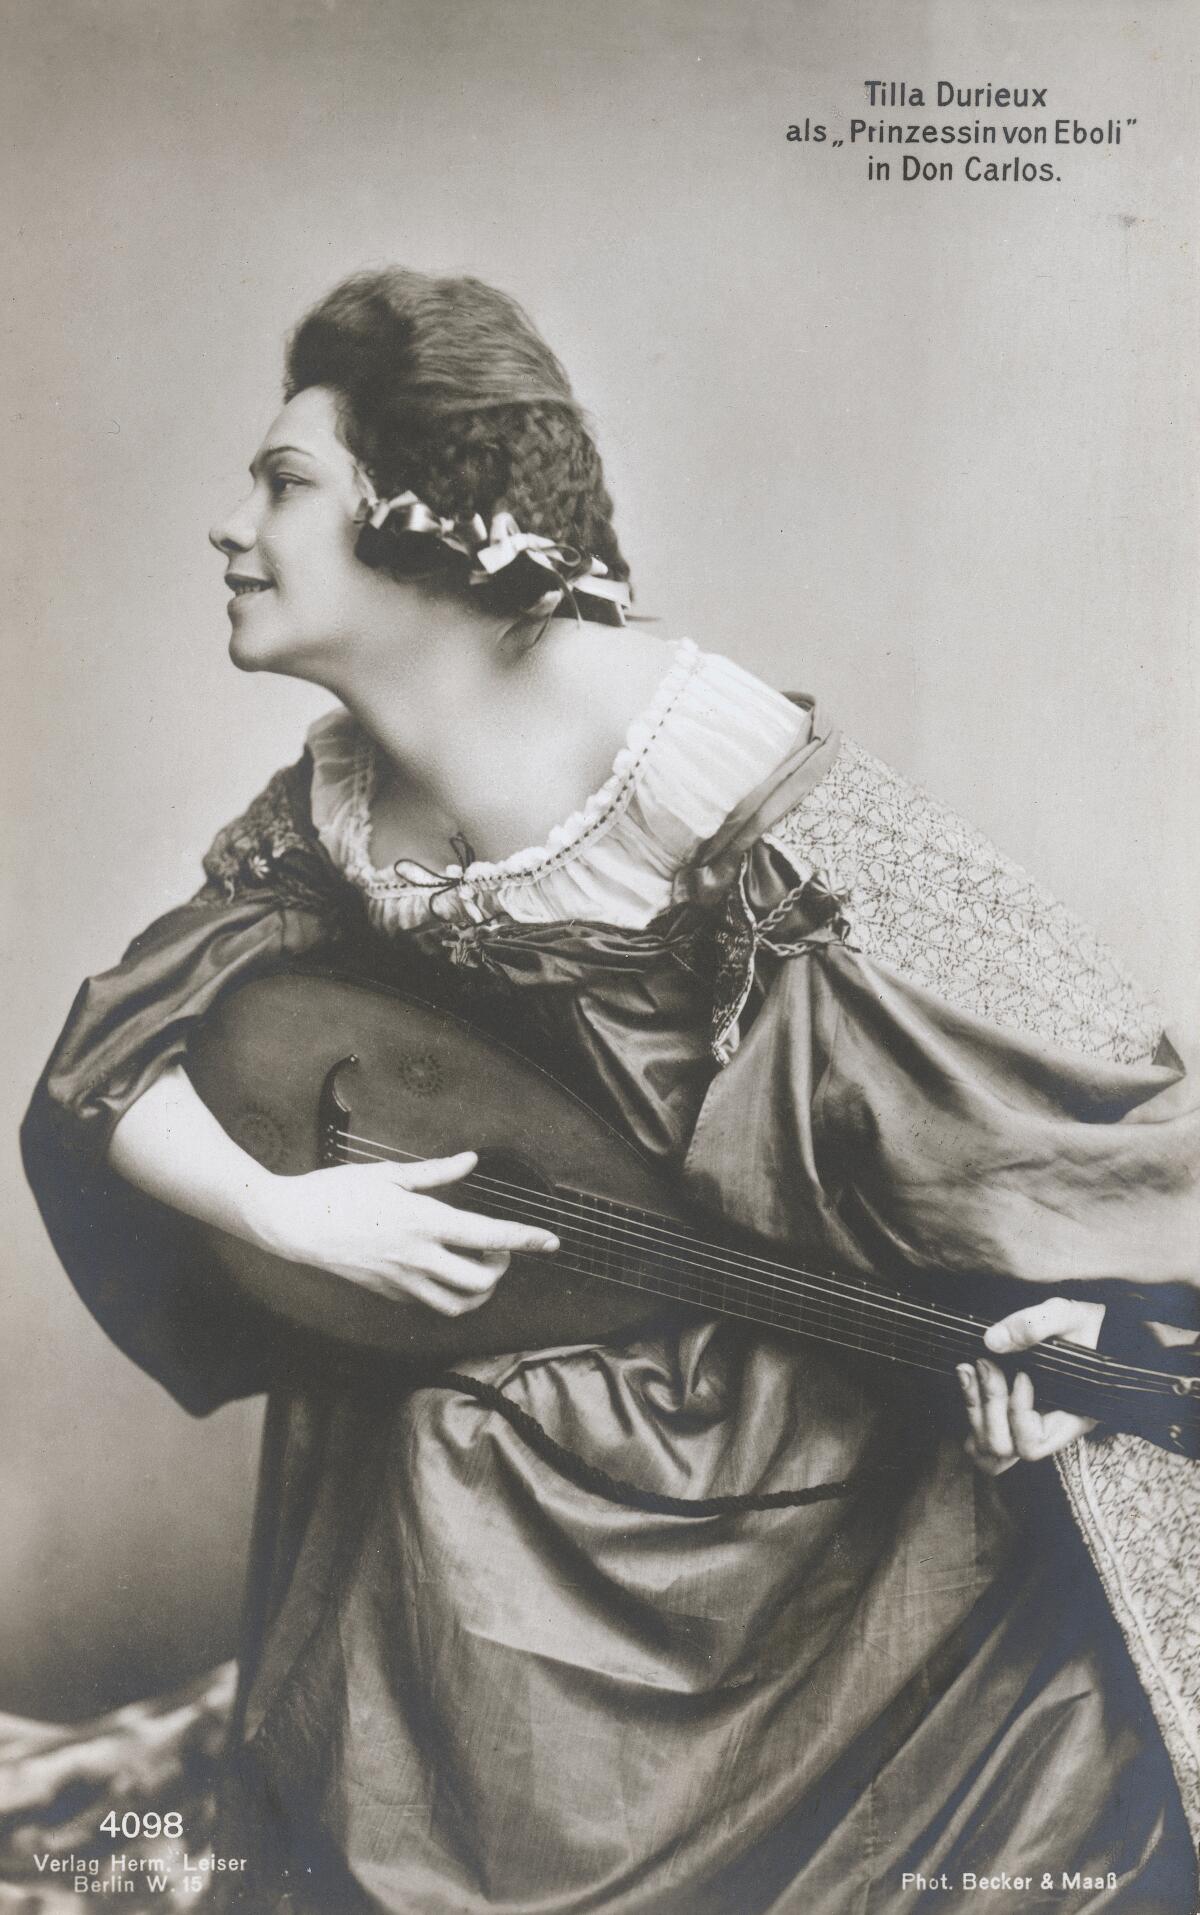 Actress Tilla Durieux as the Princess of Eboli in the play "Don Carlos."